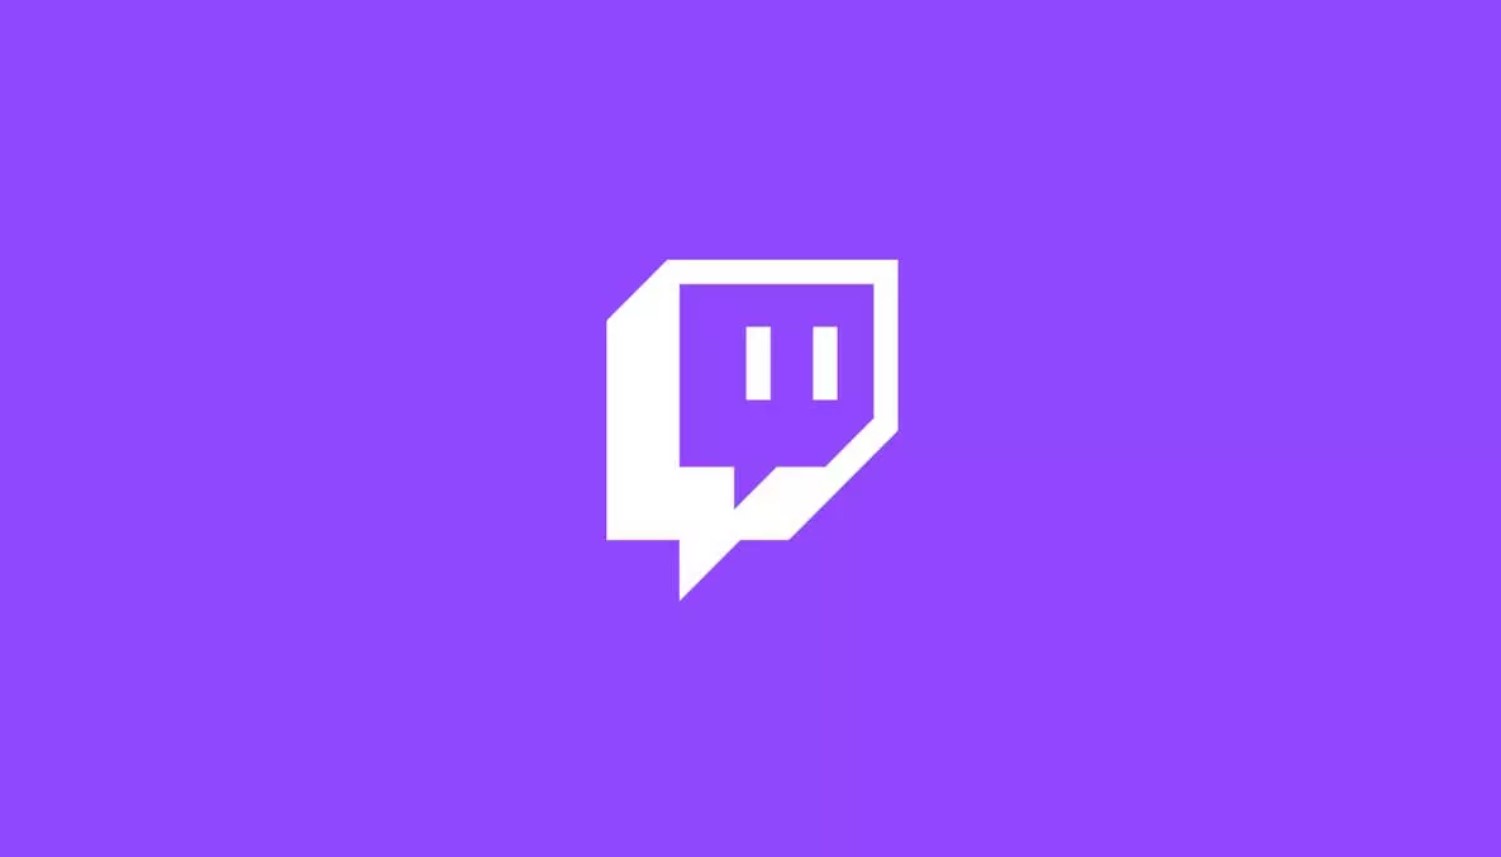 FIND OUT HOW MUCH MONEY YOU CAN EARN ON TWITCH IN THIS 2022